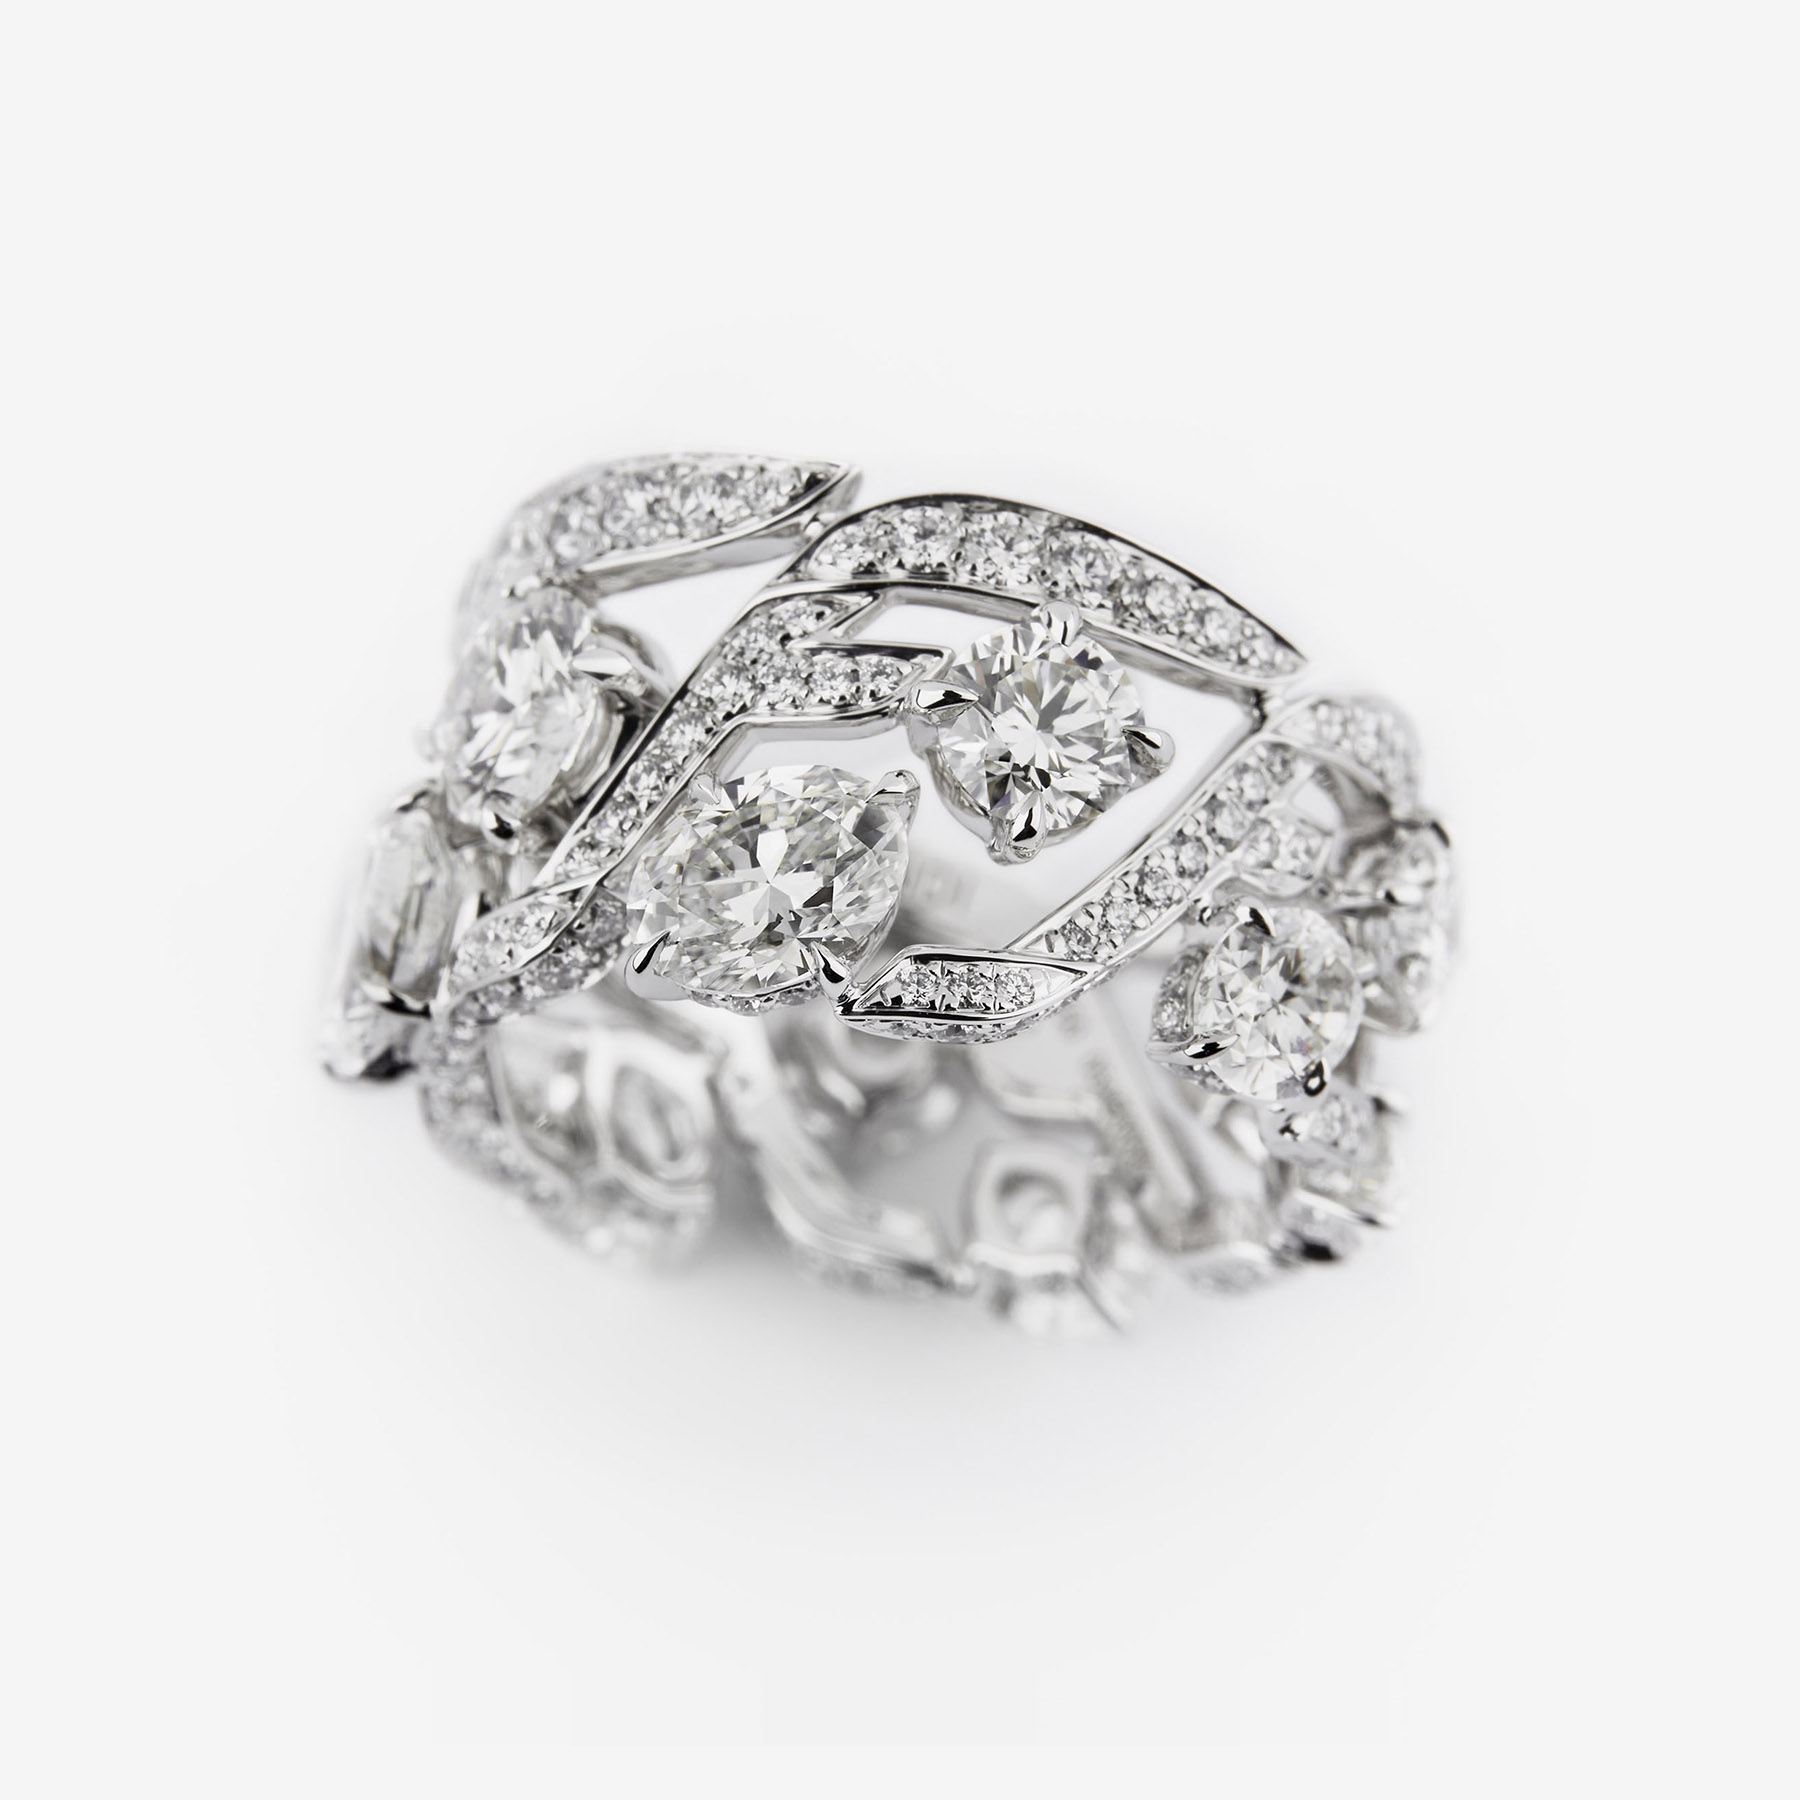 White Gold Ring Adorned with Diamonds